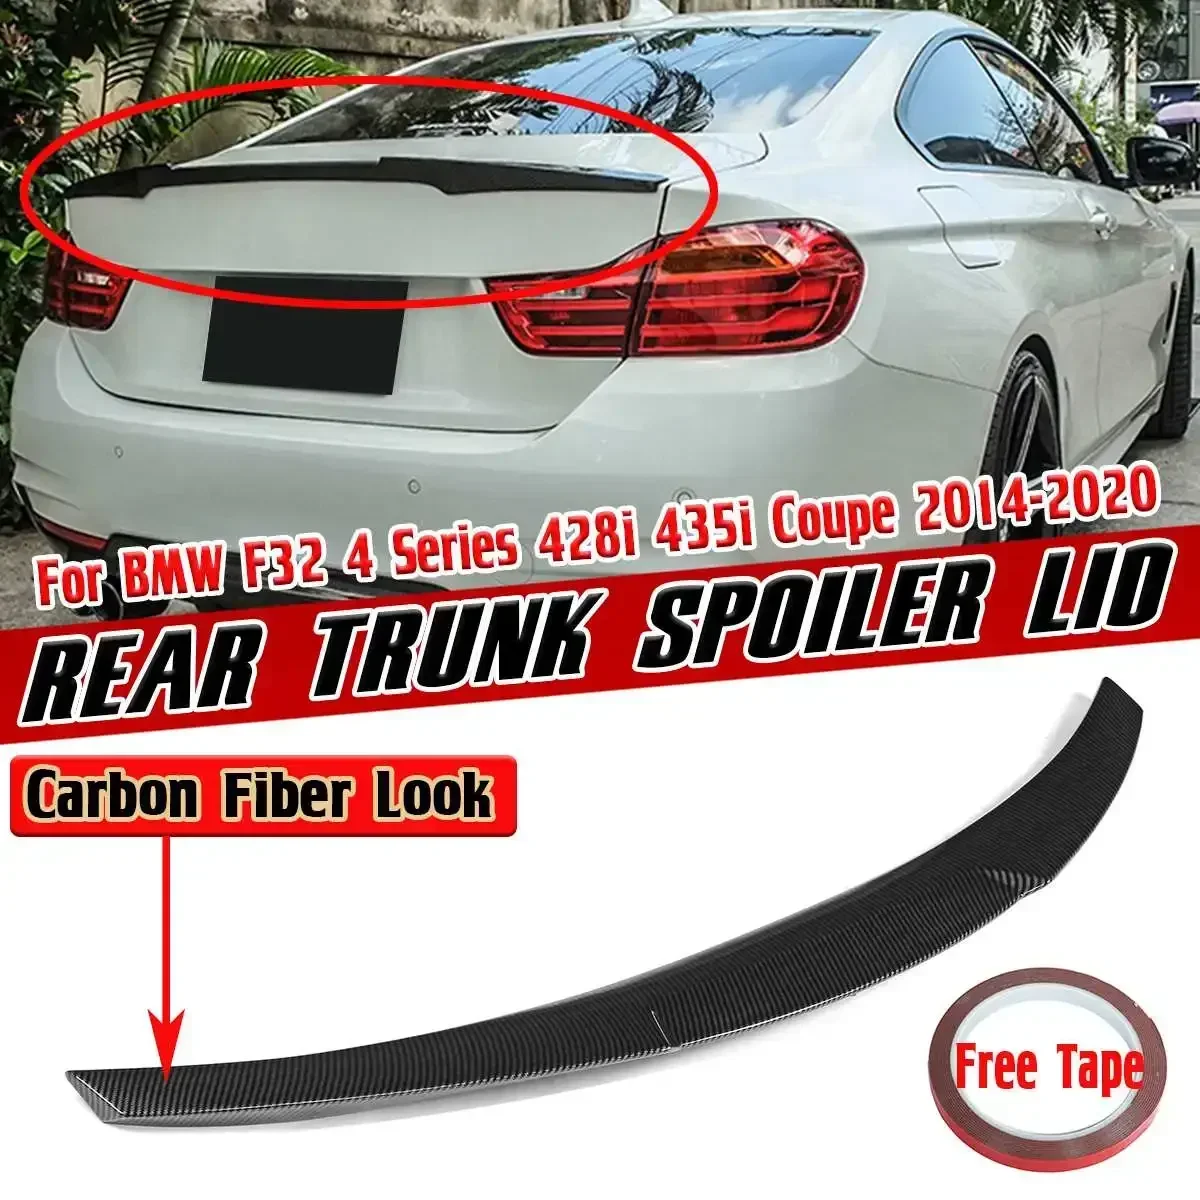 

M4 Style Car Rear Trunk Spoiler Wing Lip Extension For BMW F32 4 Series 428i 435i Coupe 2014-2020 Rear Boot Lip Spoiler